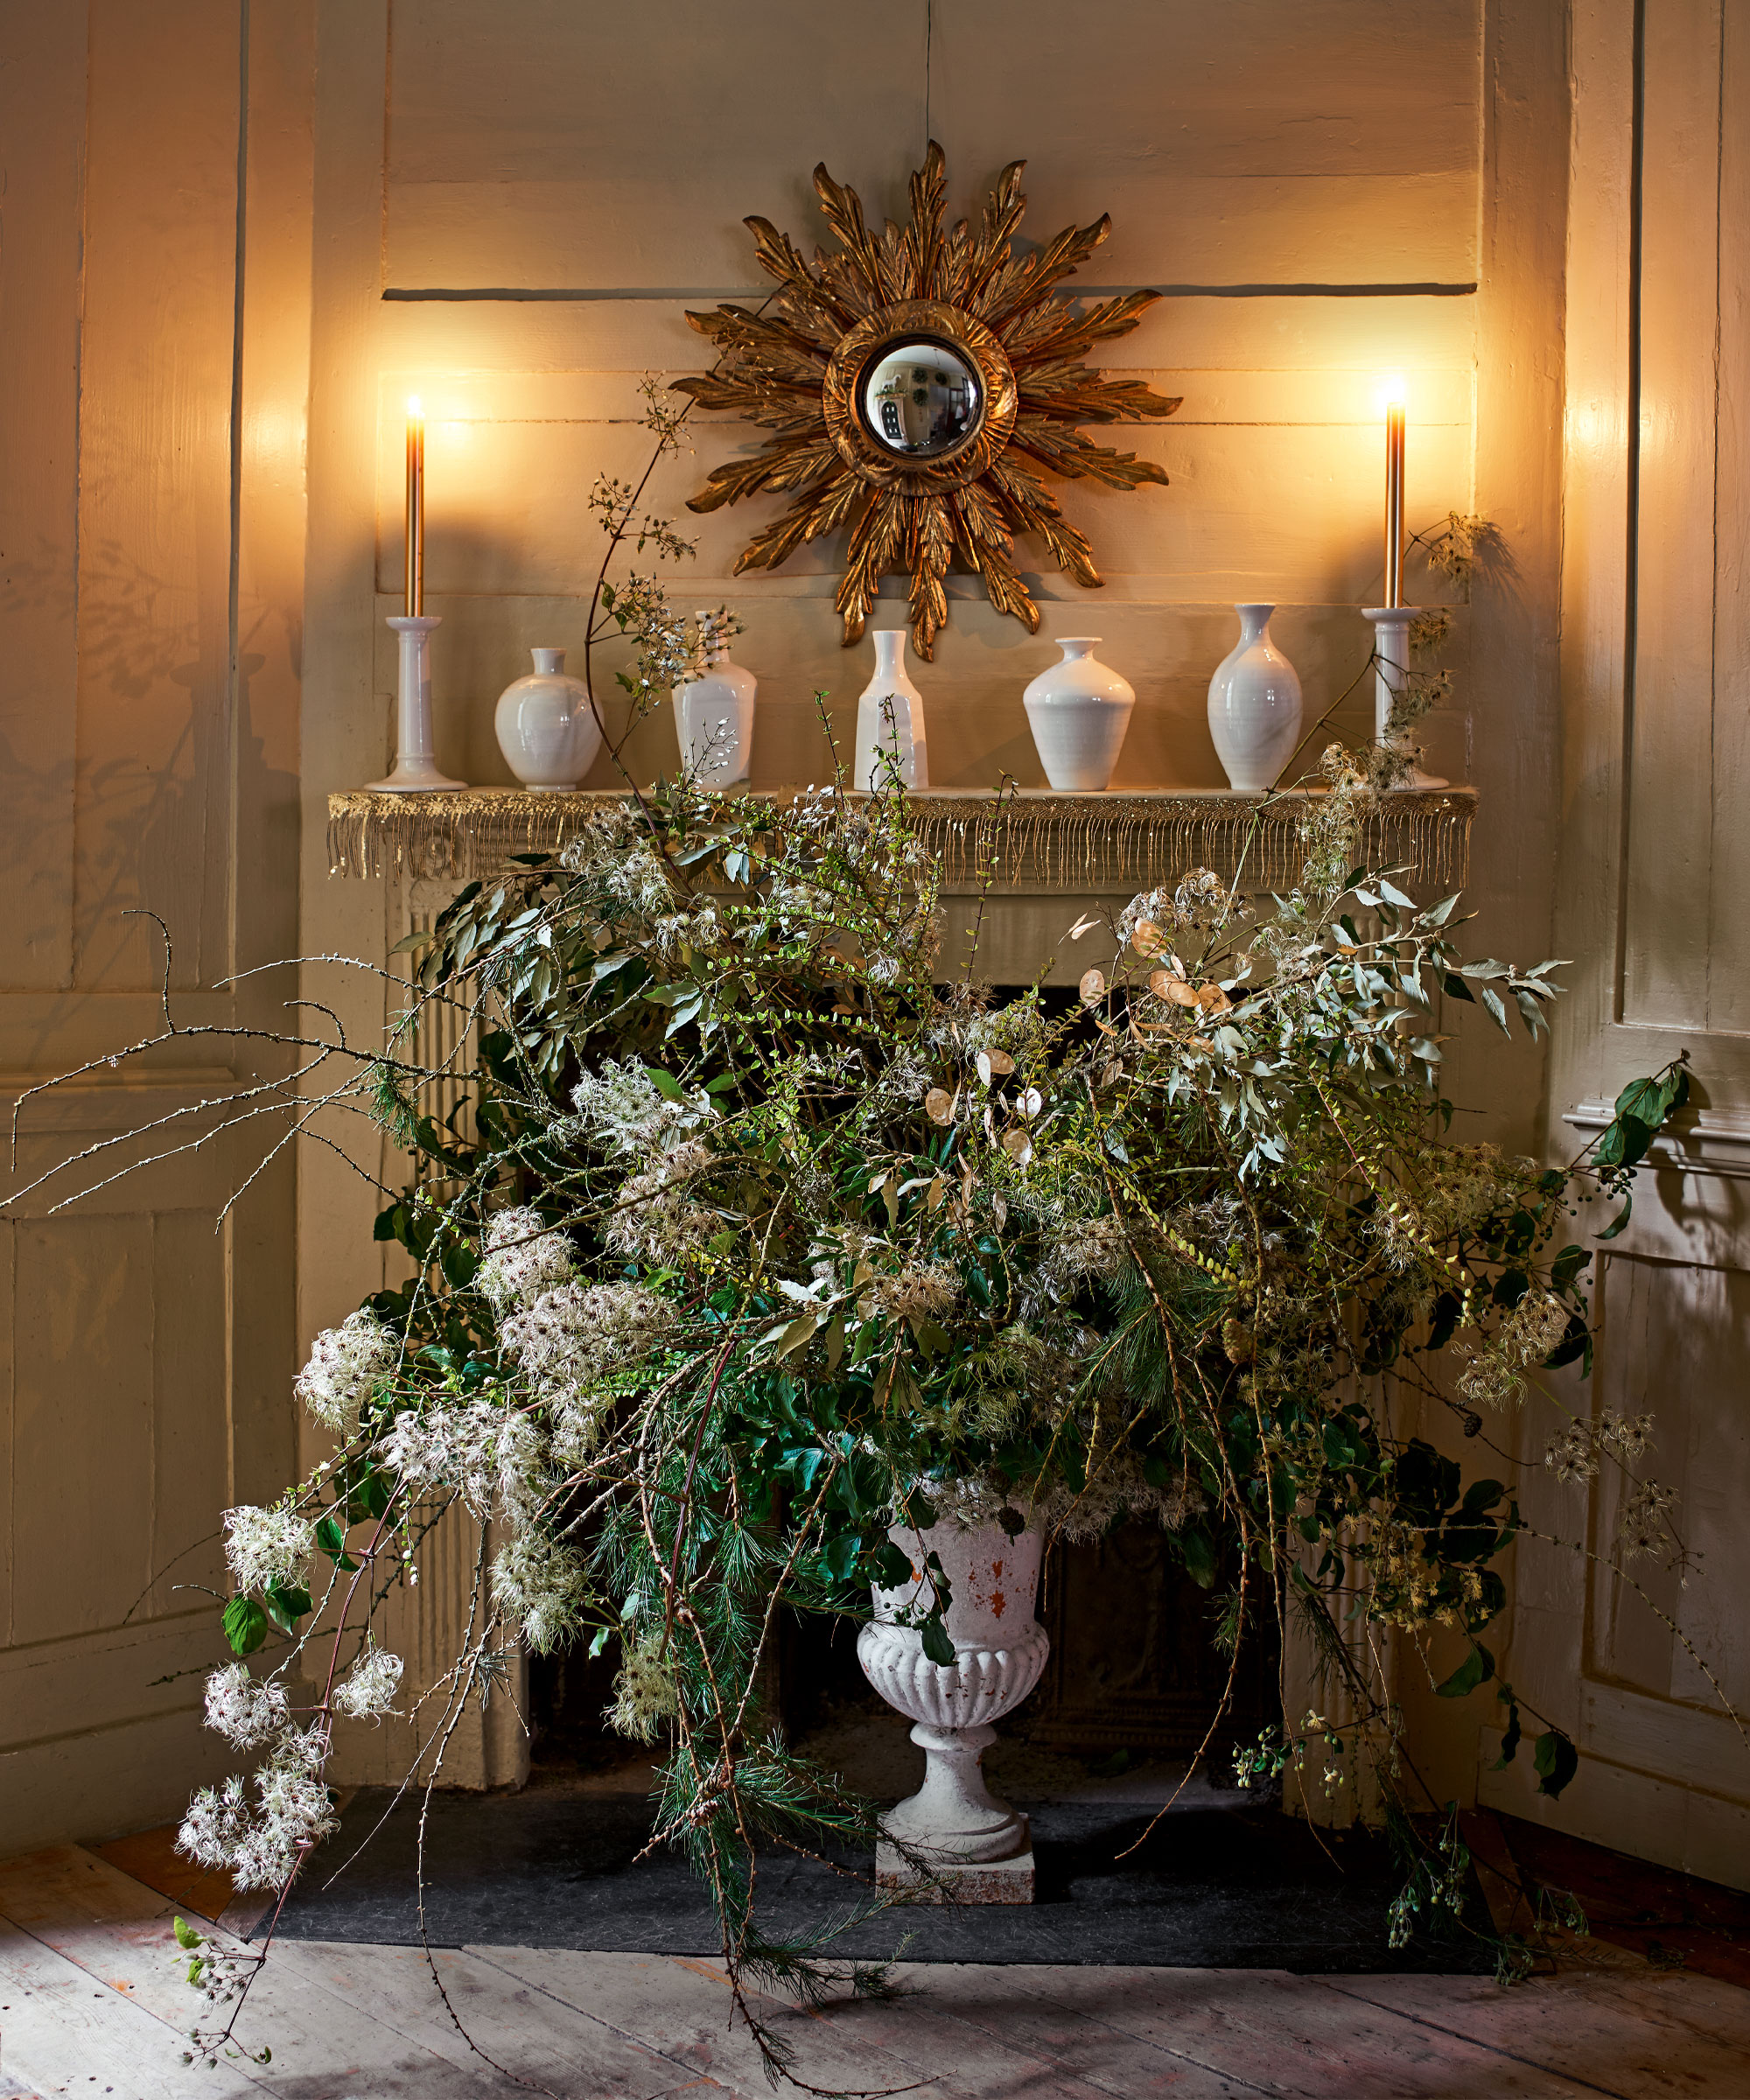 Fireplace decorated with candles, ceramics and vase of flowers and foliage